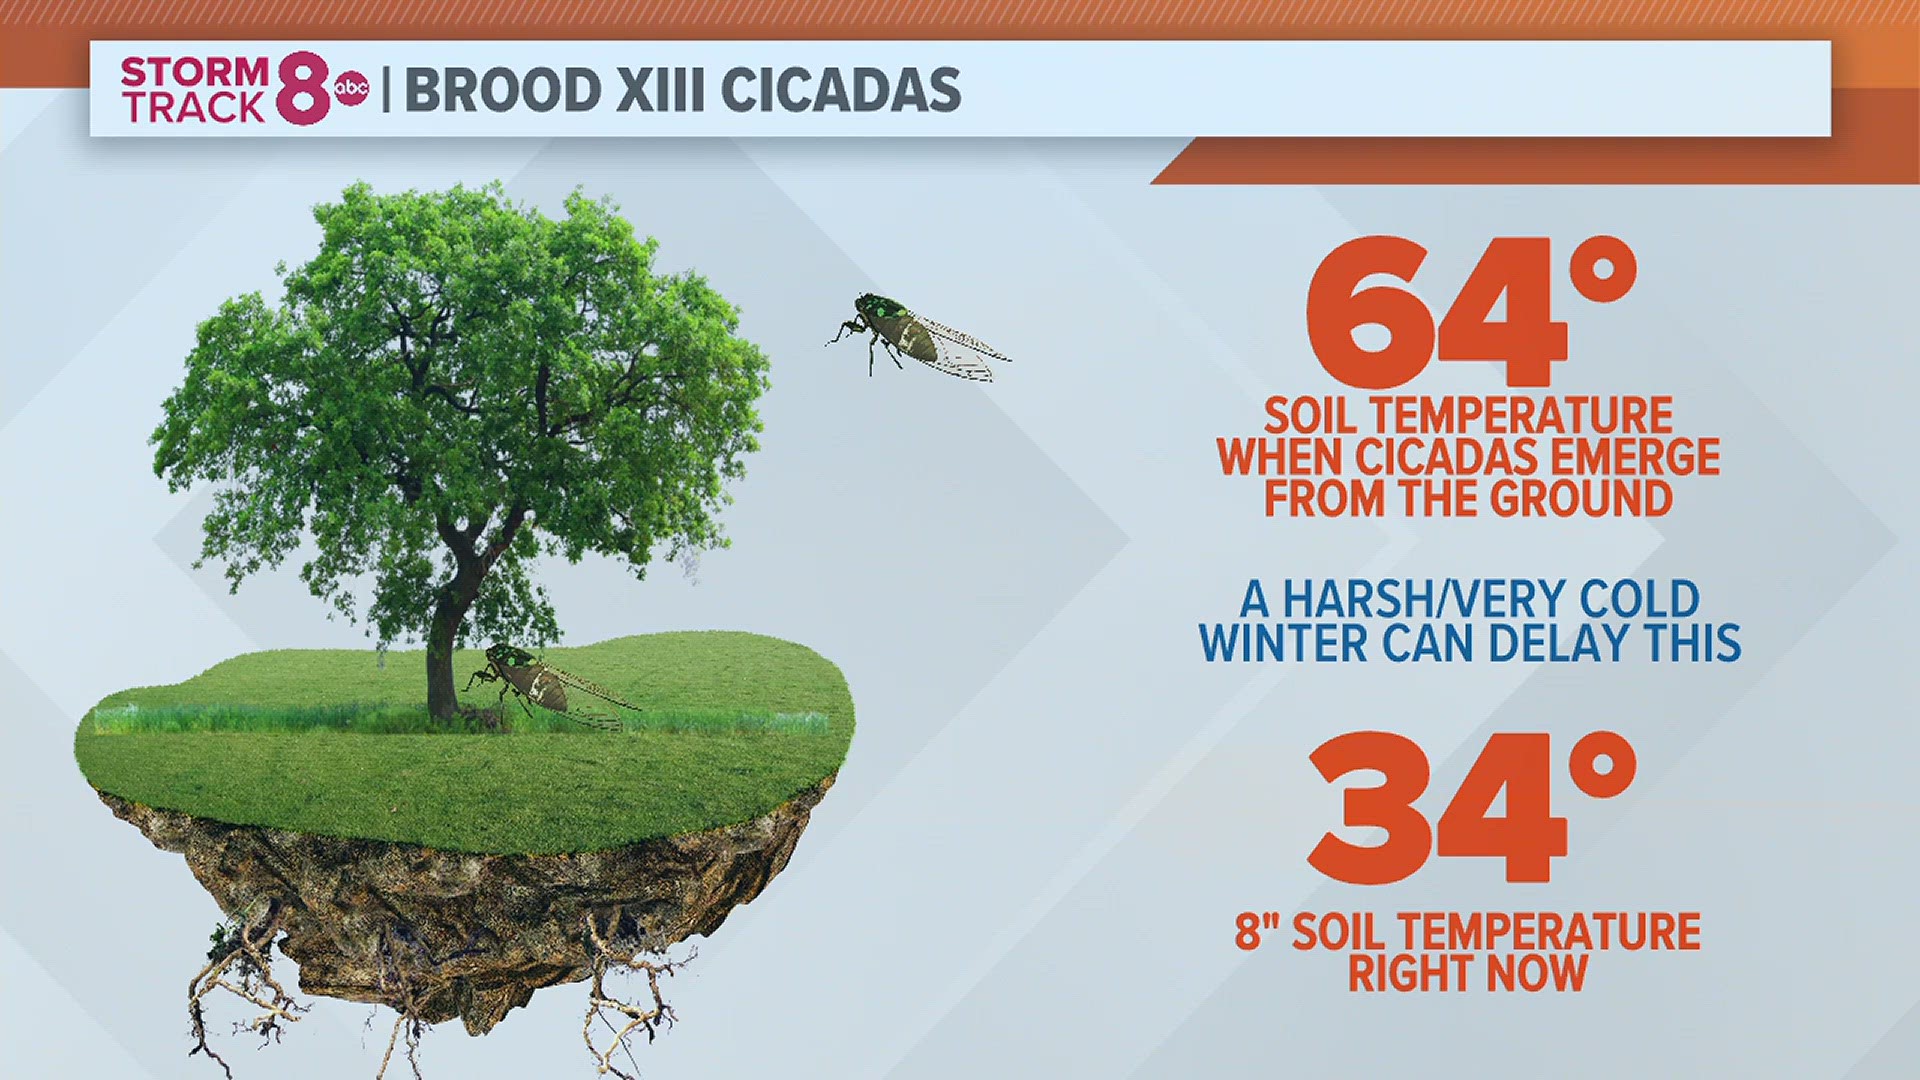 Meteorologist Andrew Stutzke explains how this winter will impact the upcoming cicada brood hatch later this spring.